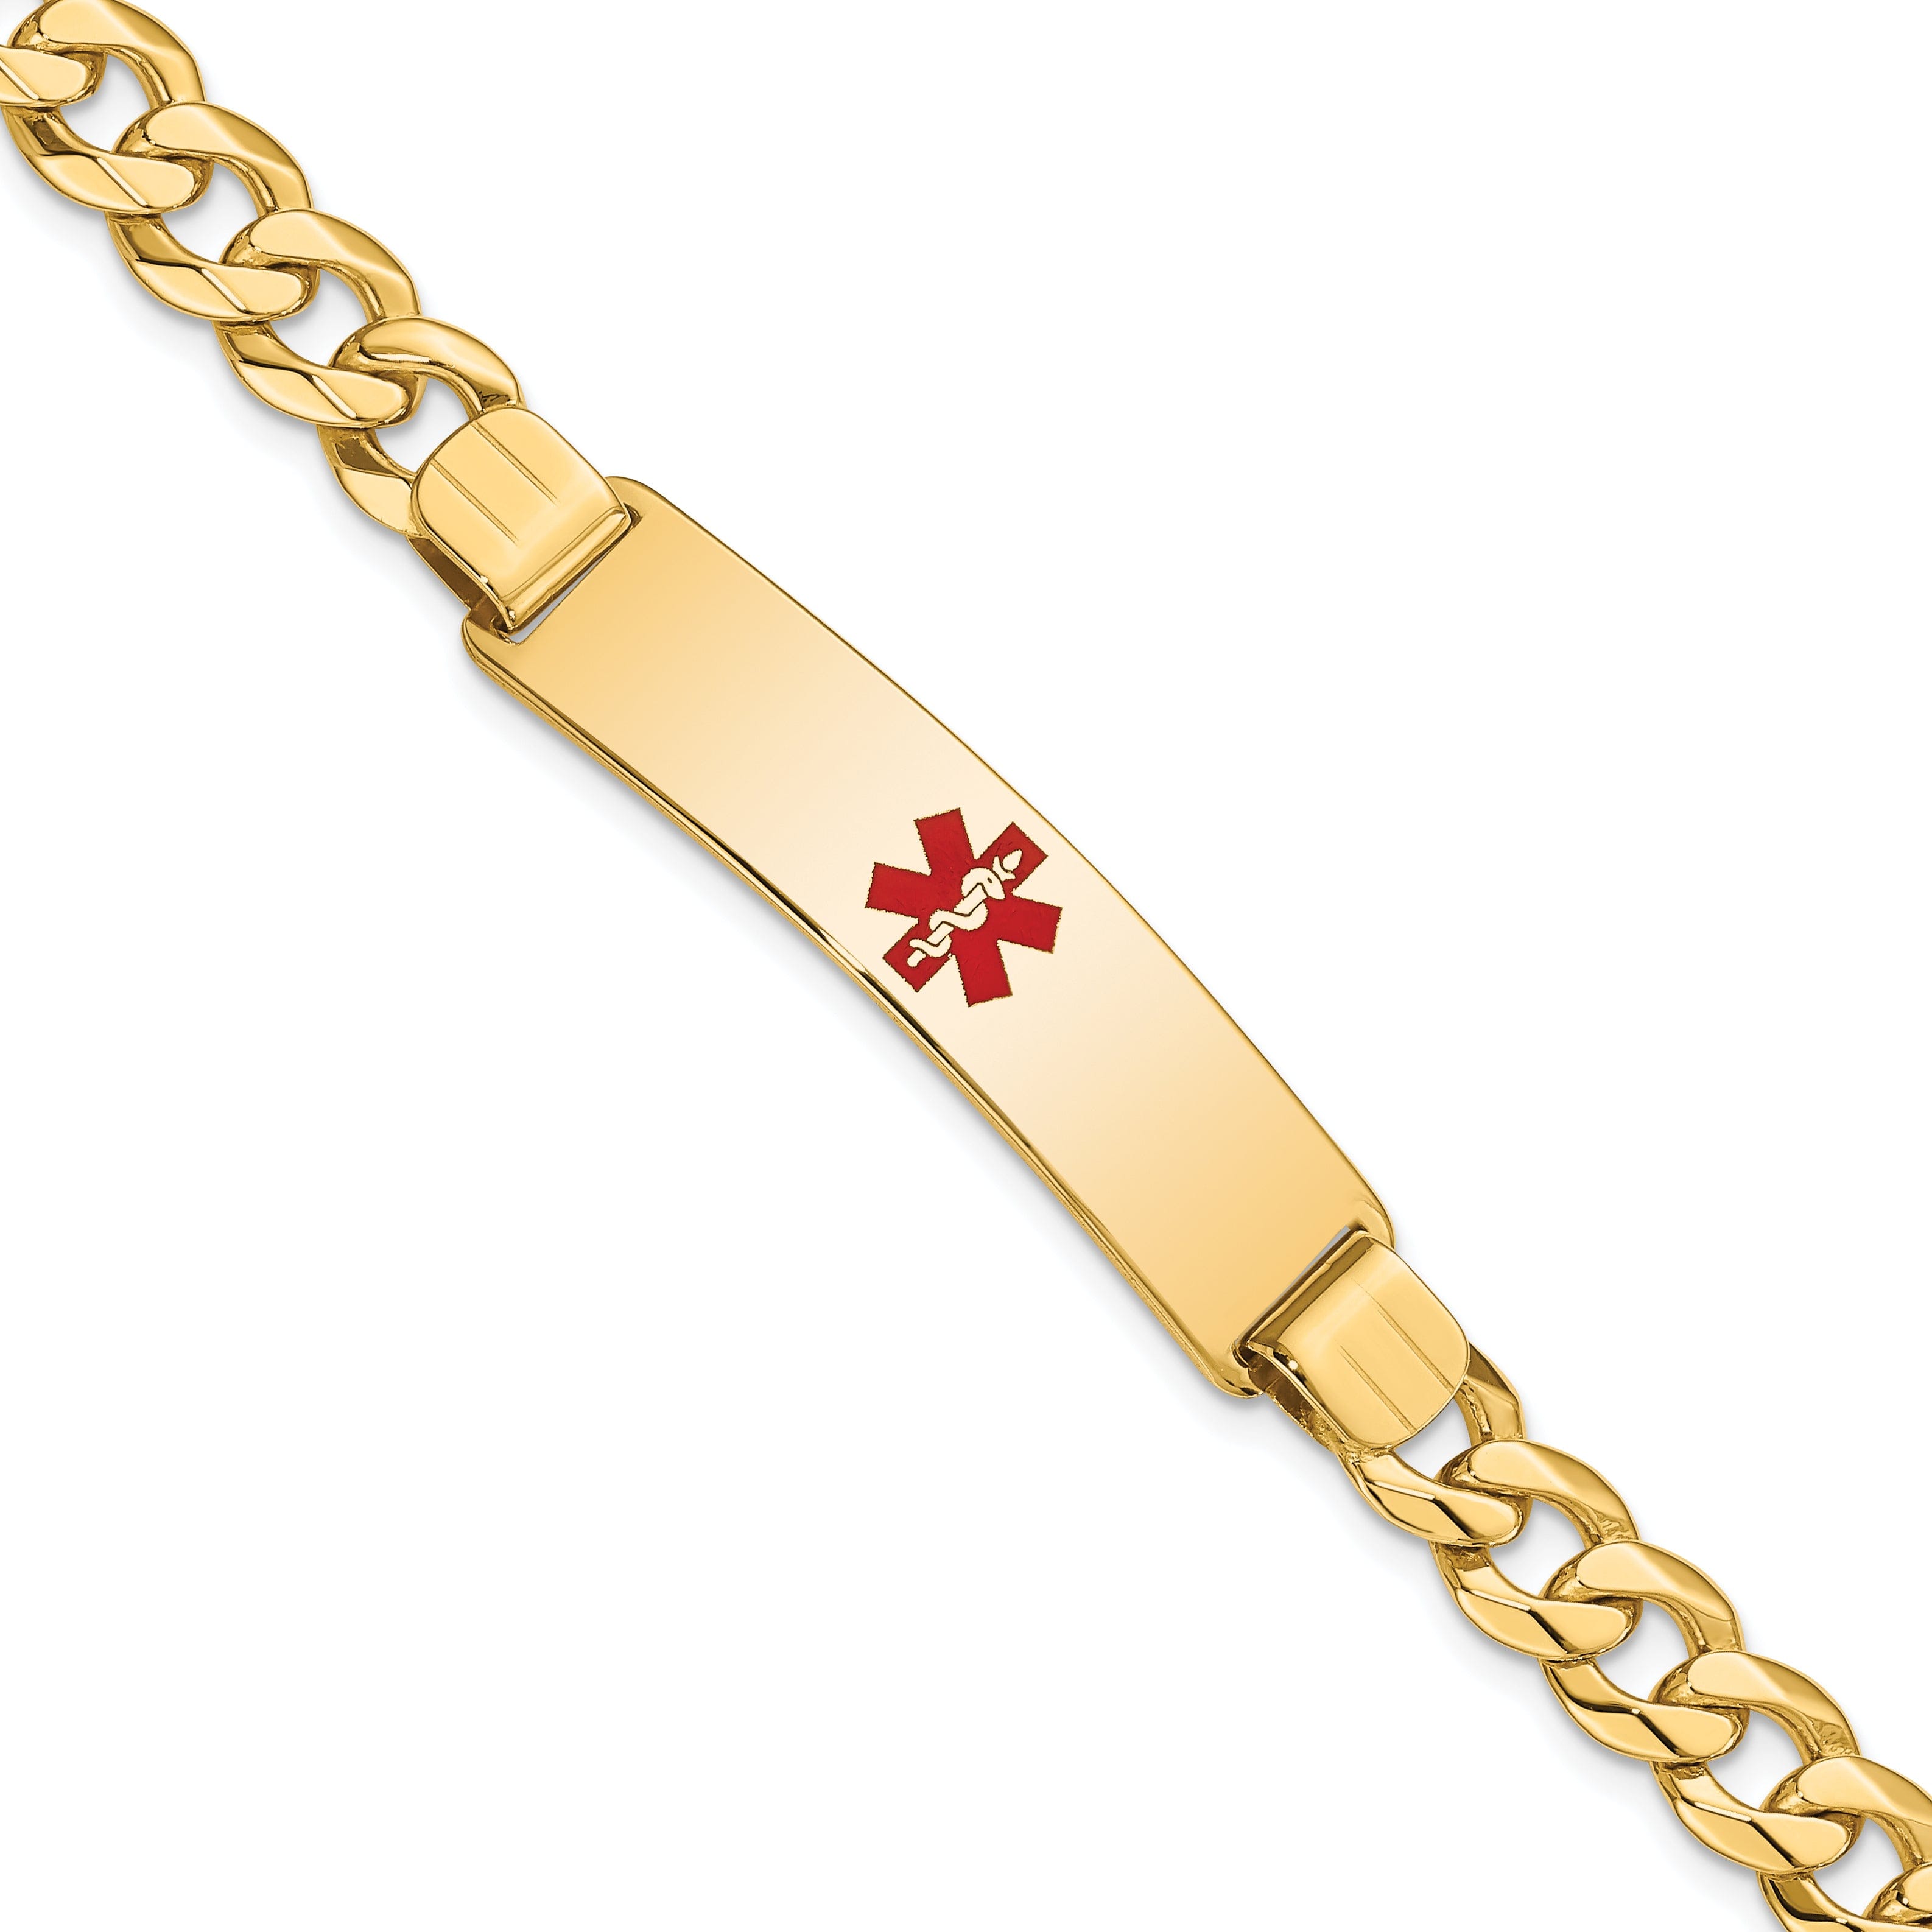 14K Yellow Gold Curb Link Medical ID Bracelet | Jewelry Shopping